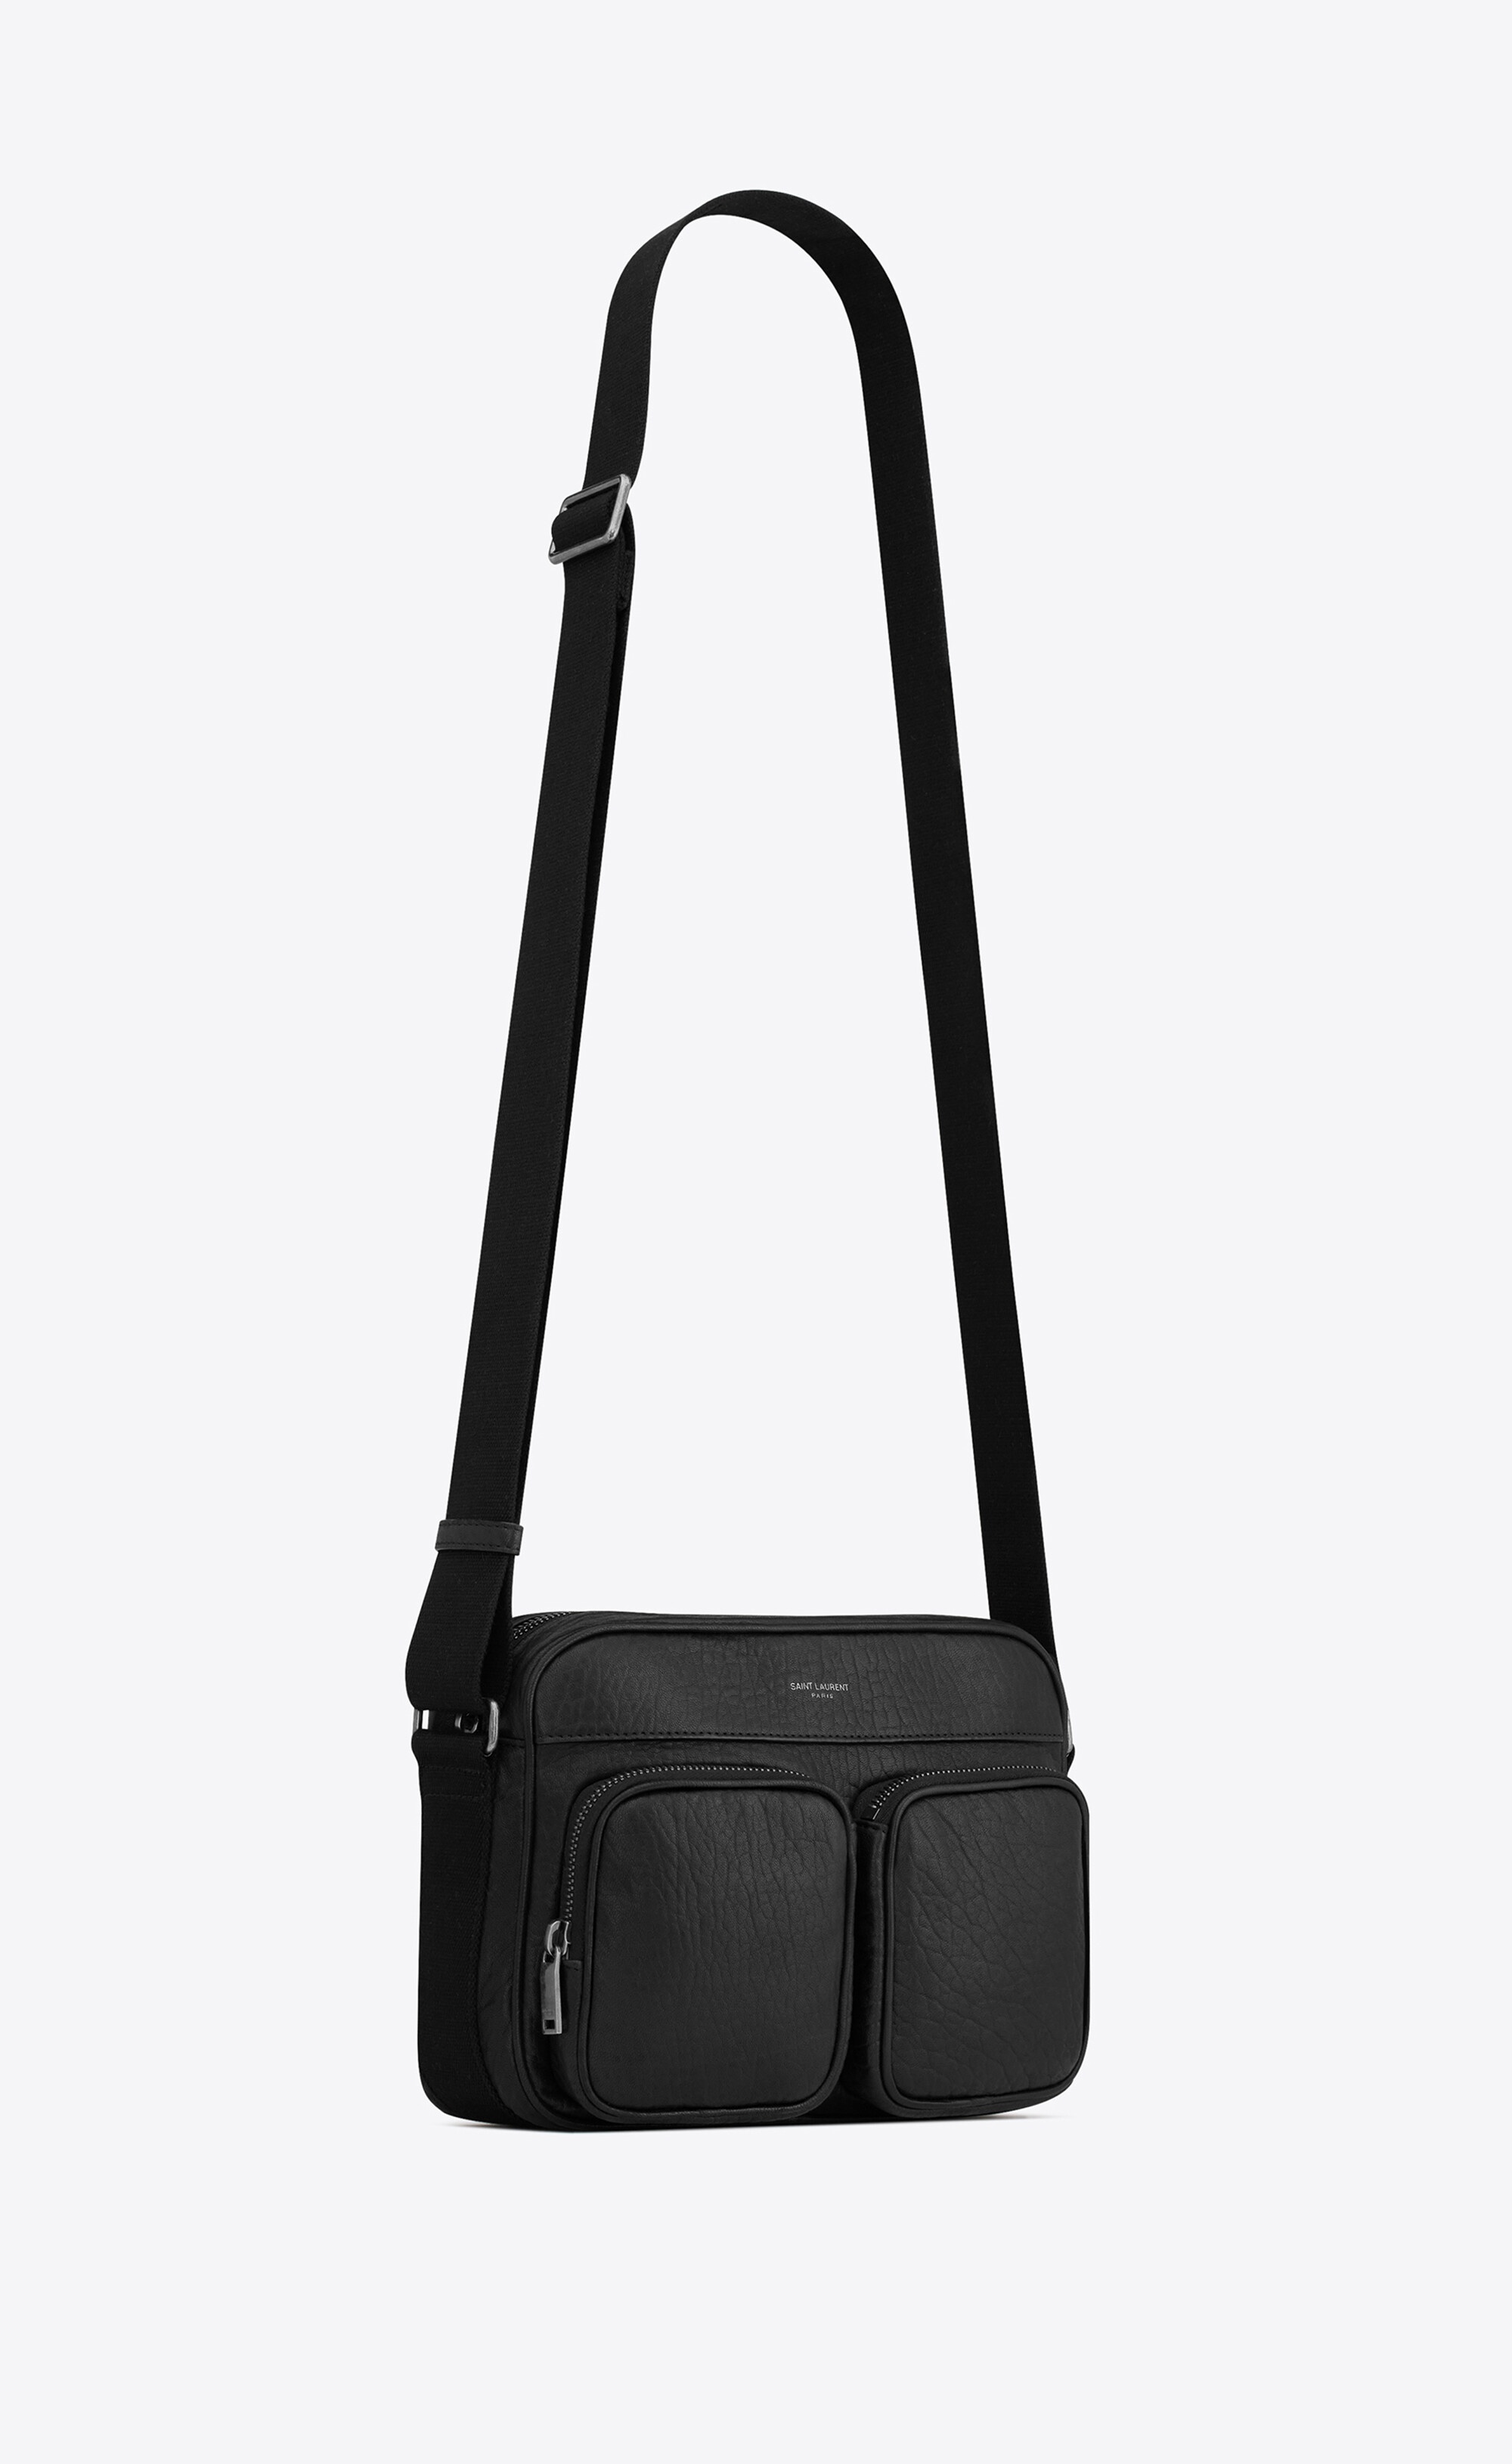 city saint laurent camera bag in grained leather - 4